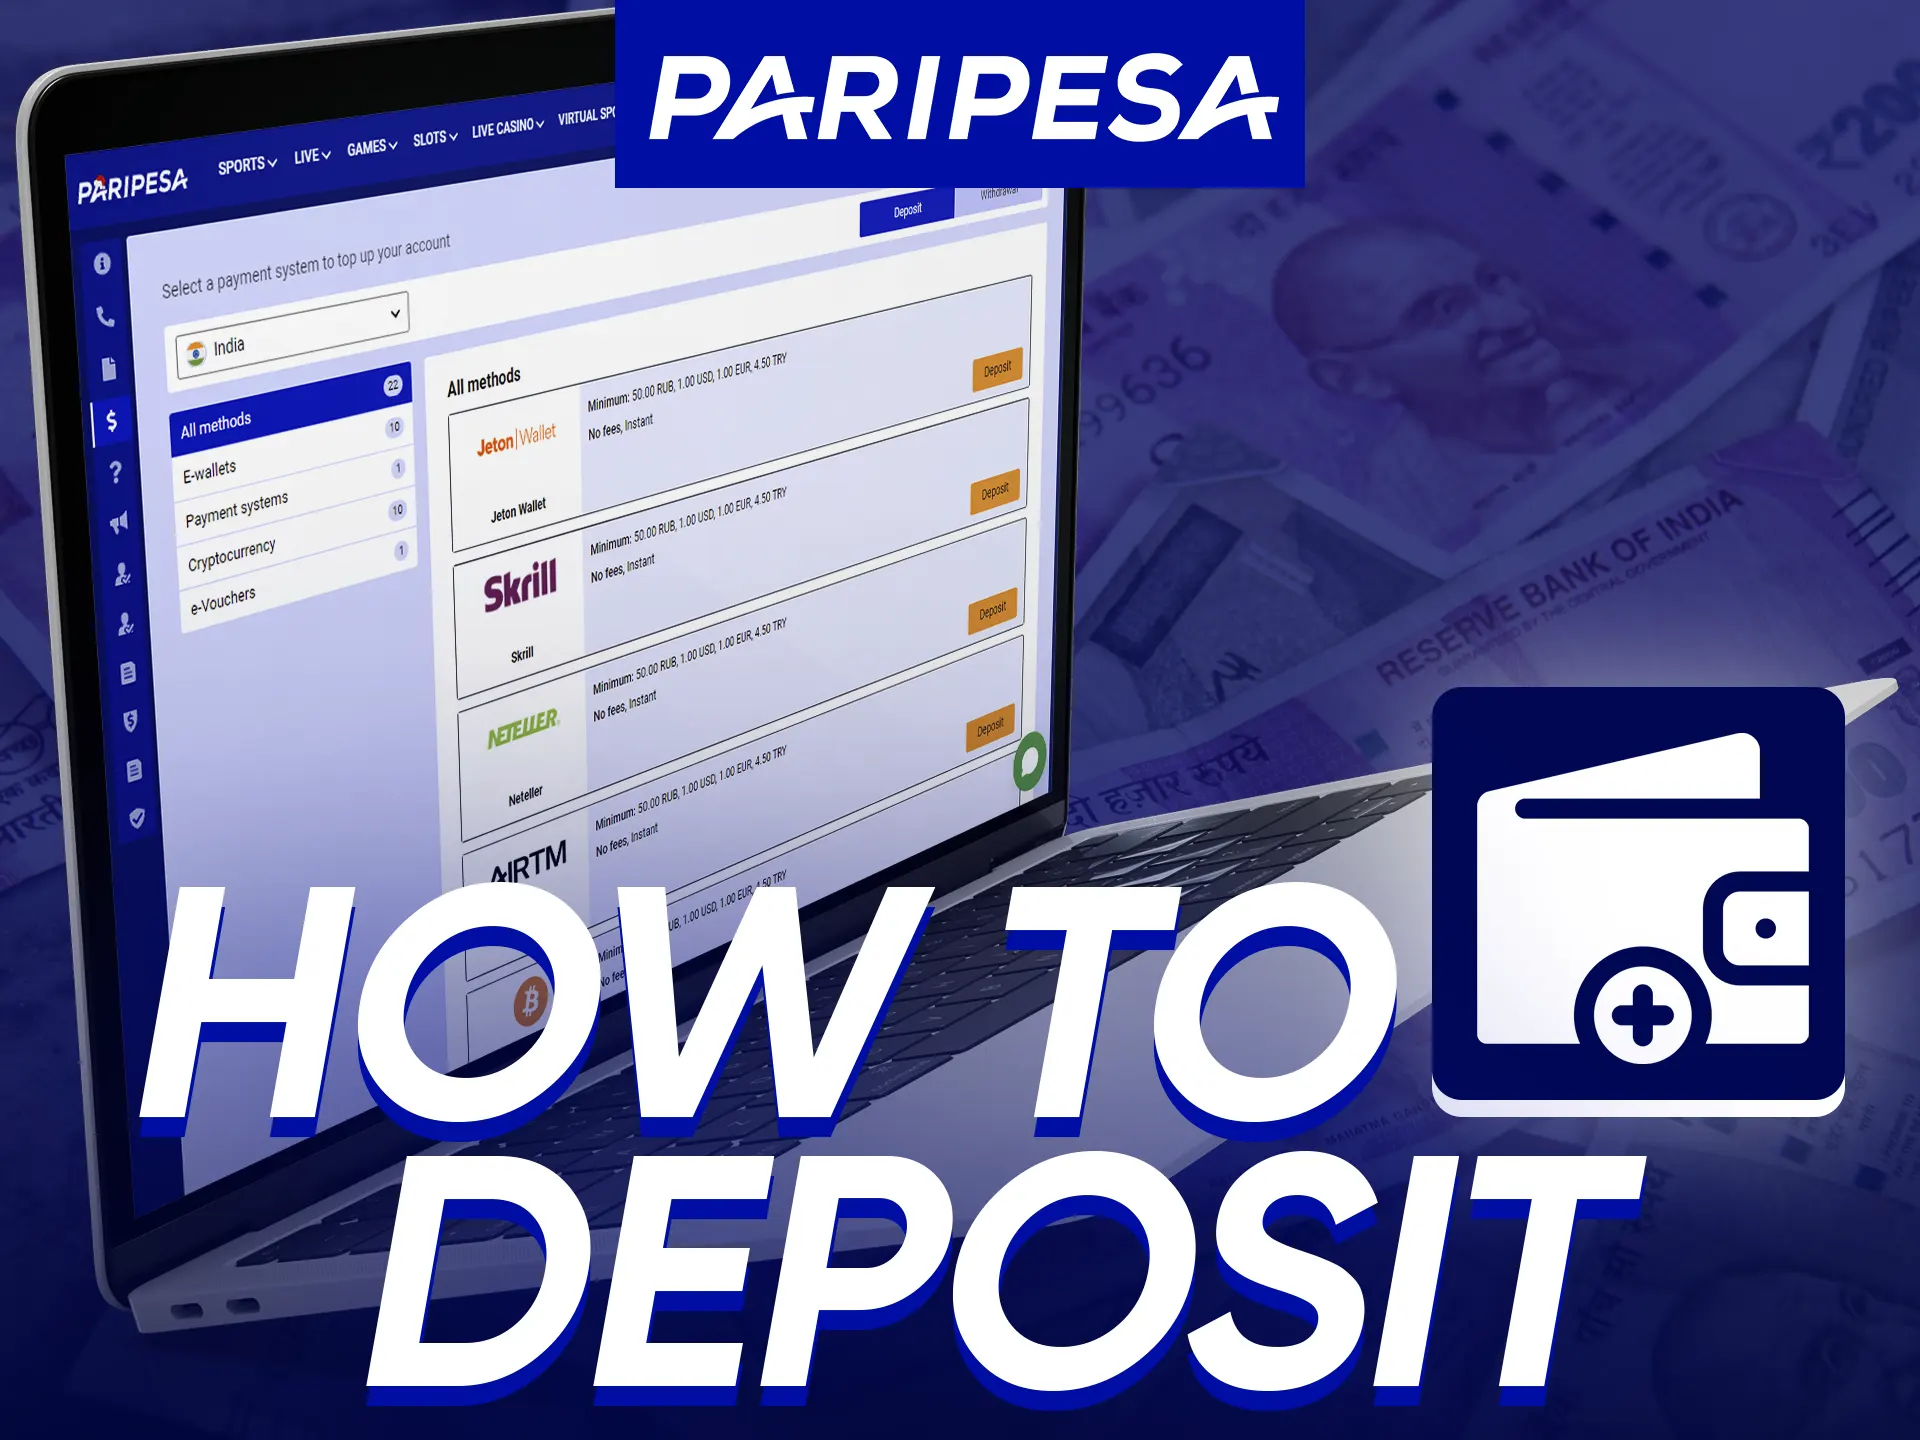 To deposit at Paripesa, log in, access "Cashier," choose method, enter details, and pay.